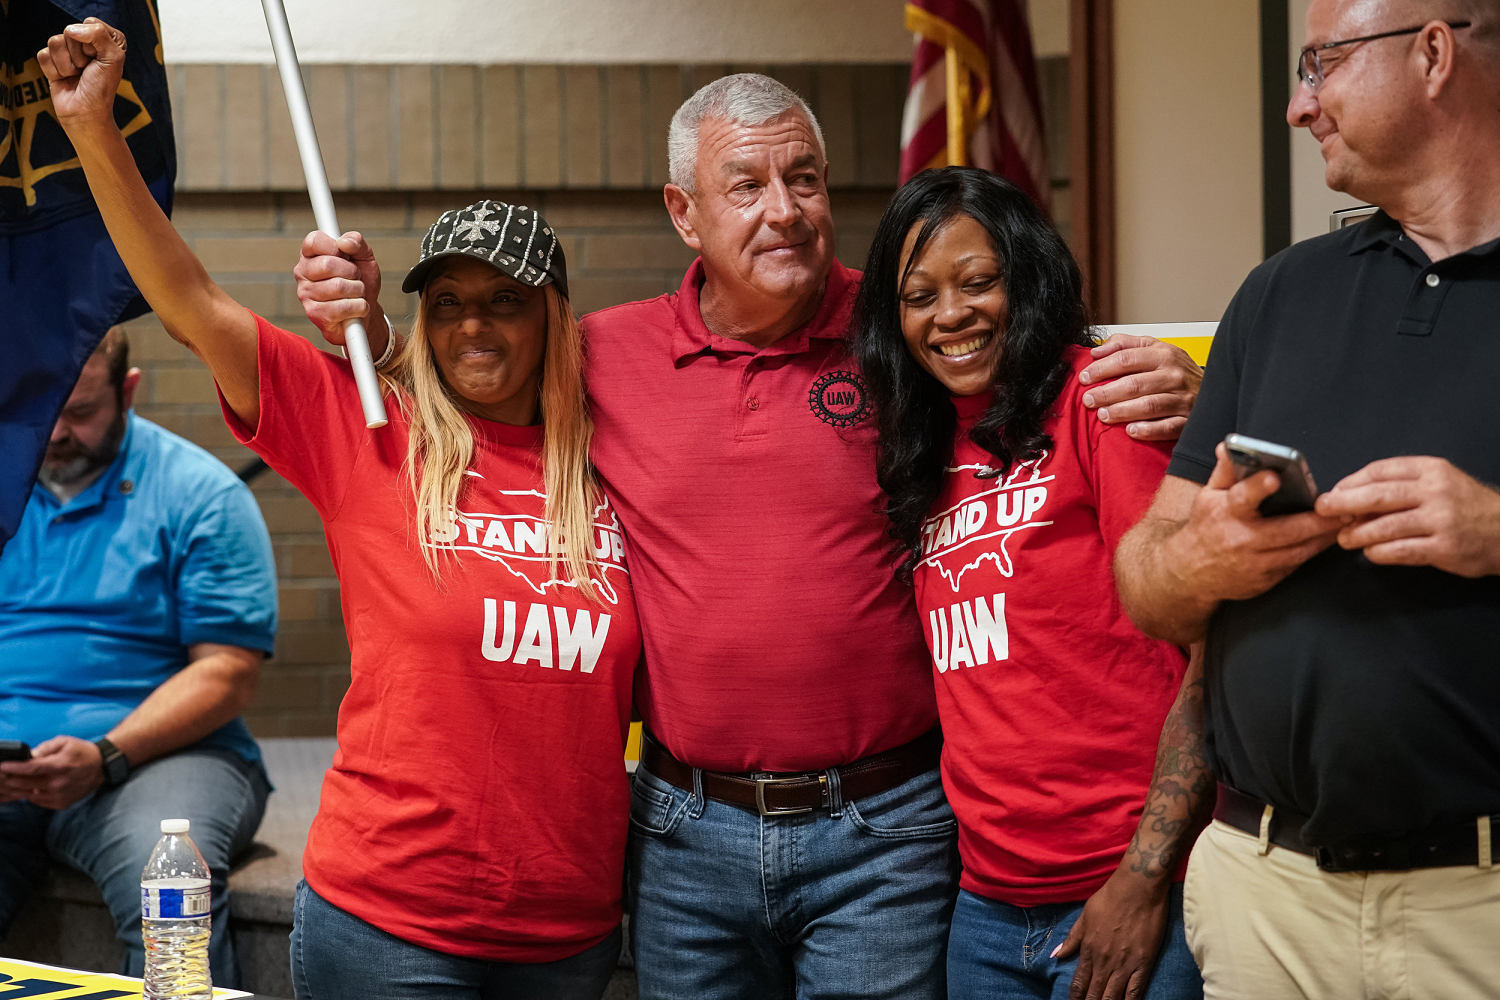 UAW's Tennessee win fuels backers' hopes in the South, but some skeptics are unmoved